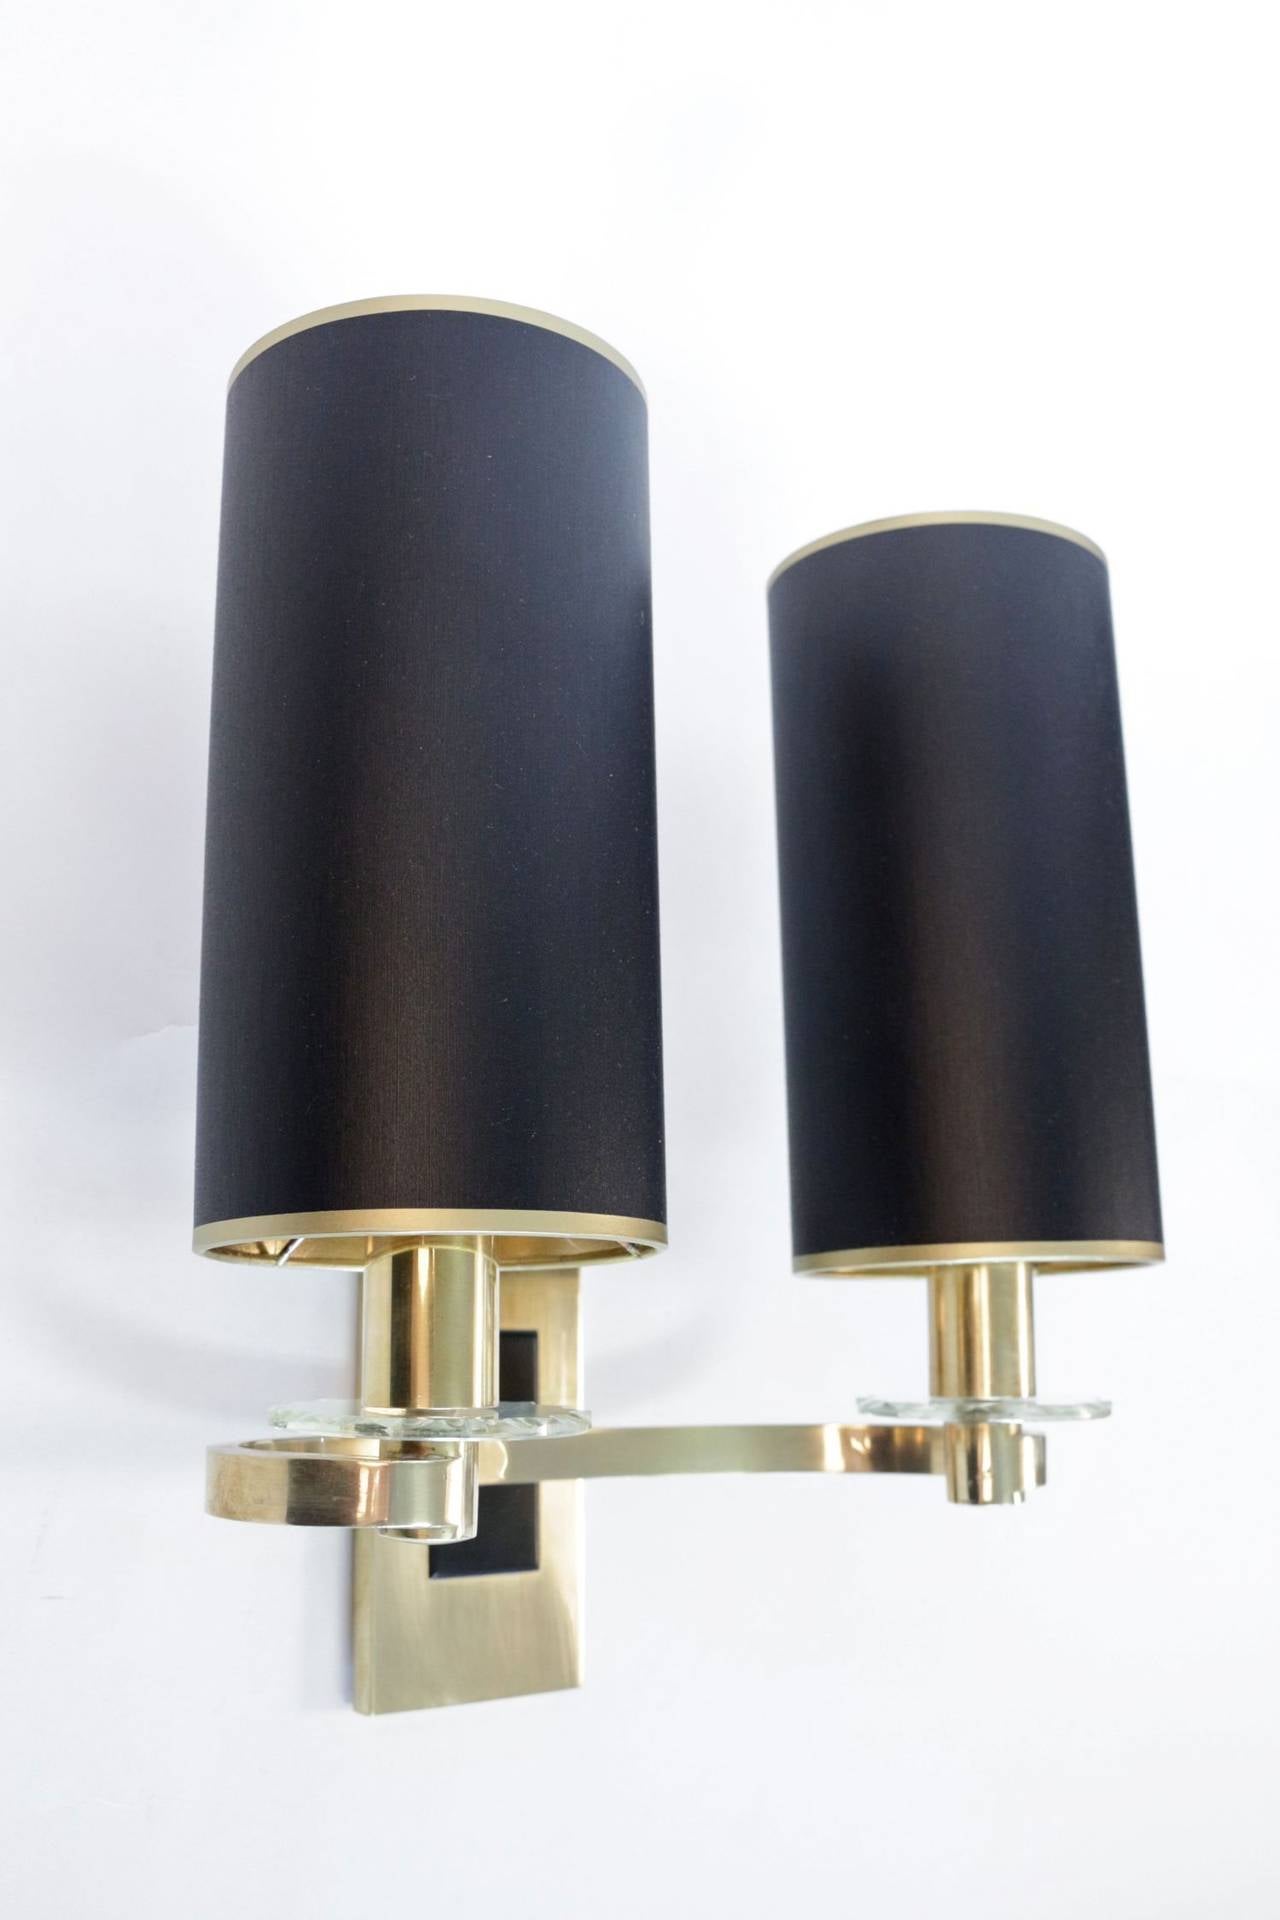 Mid-20th Century Pair of 1940s Sconces by Ateliers Petitot